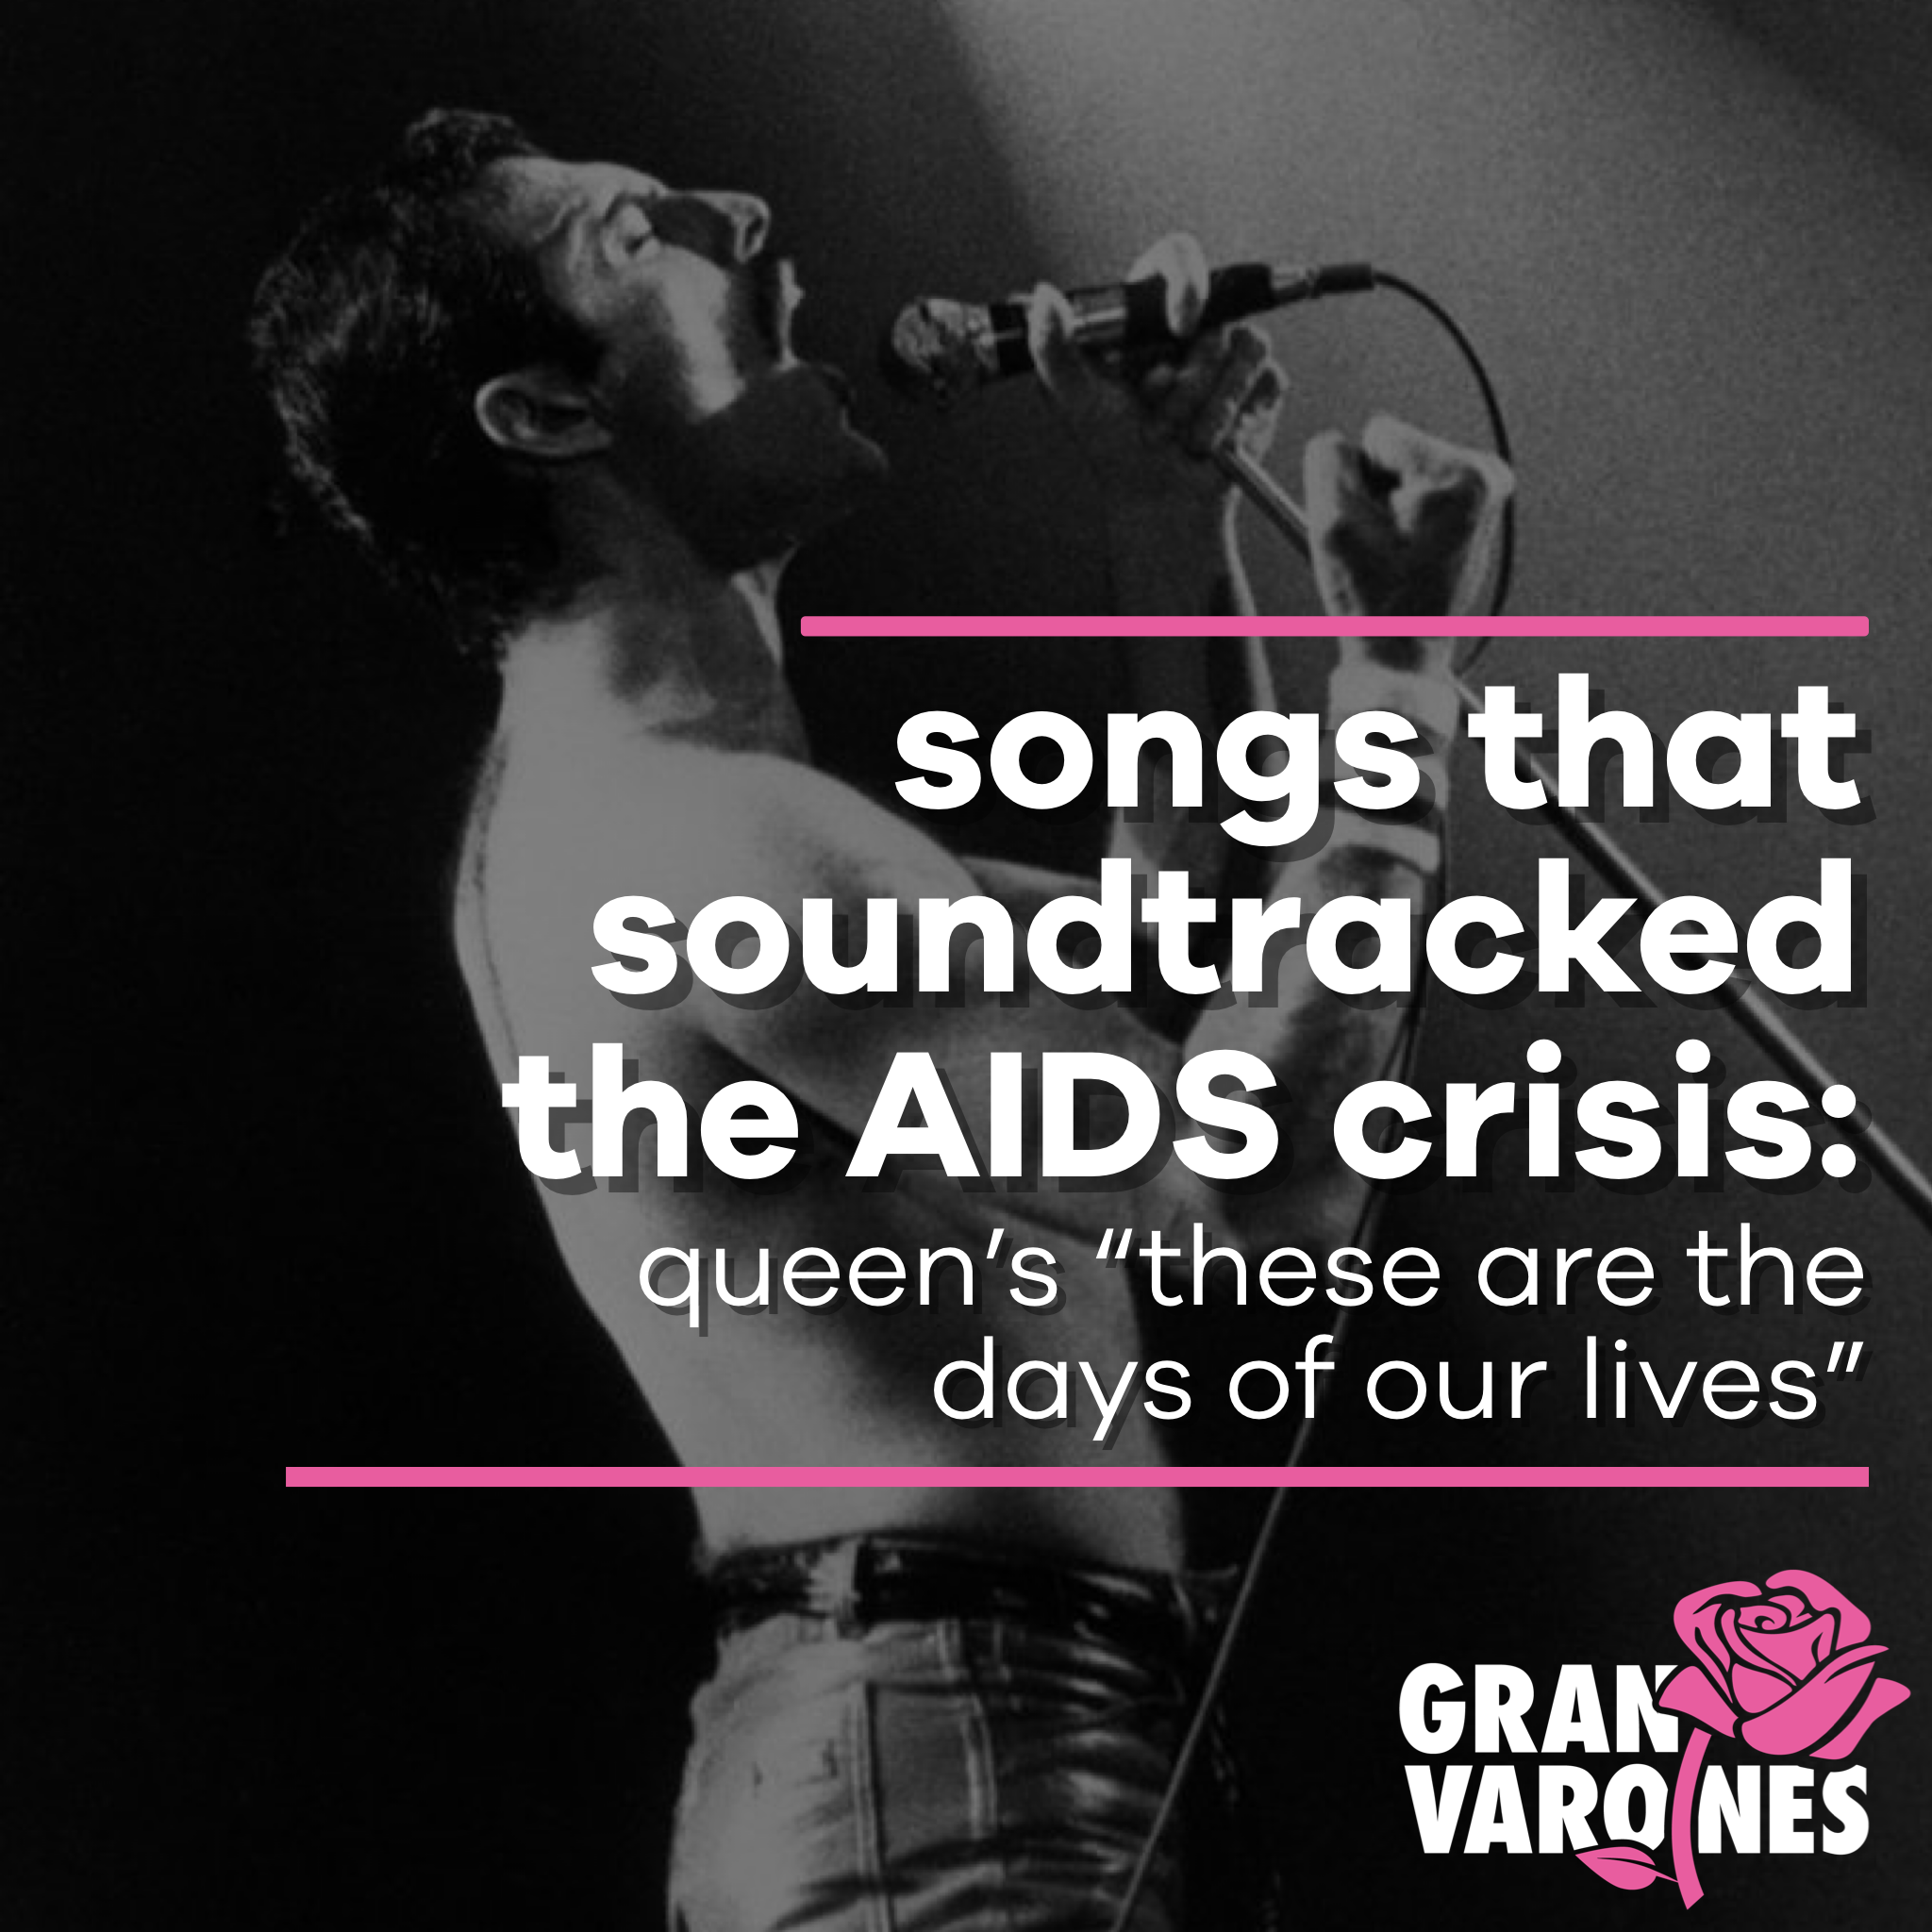 songs that soundtracked the AIDS crisis: queen’s “there are the days of our lives”